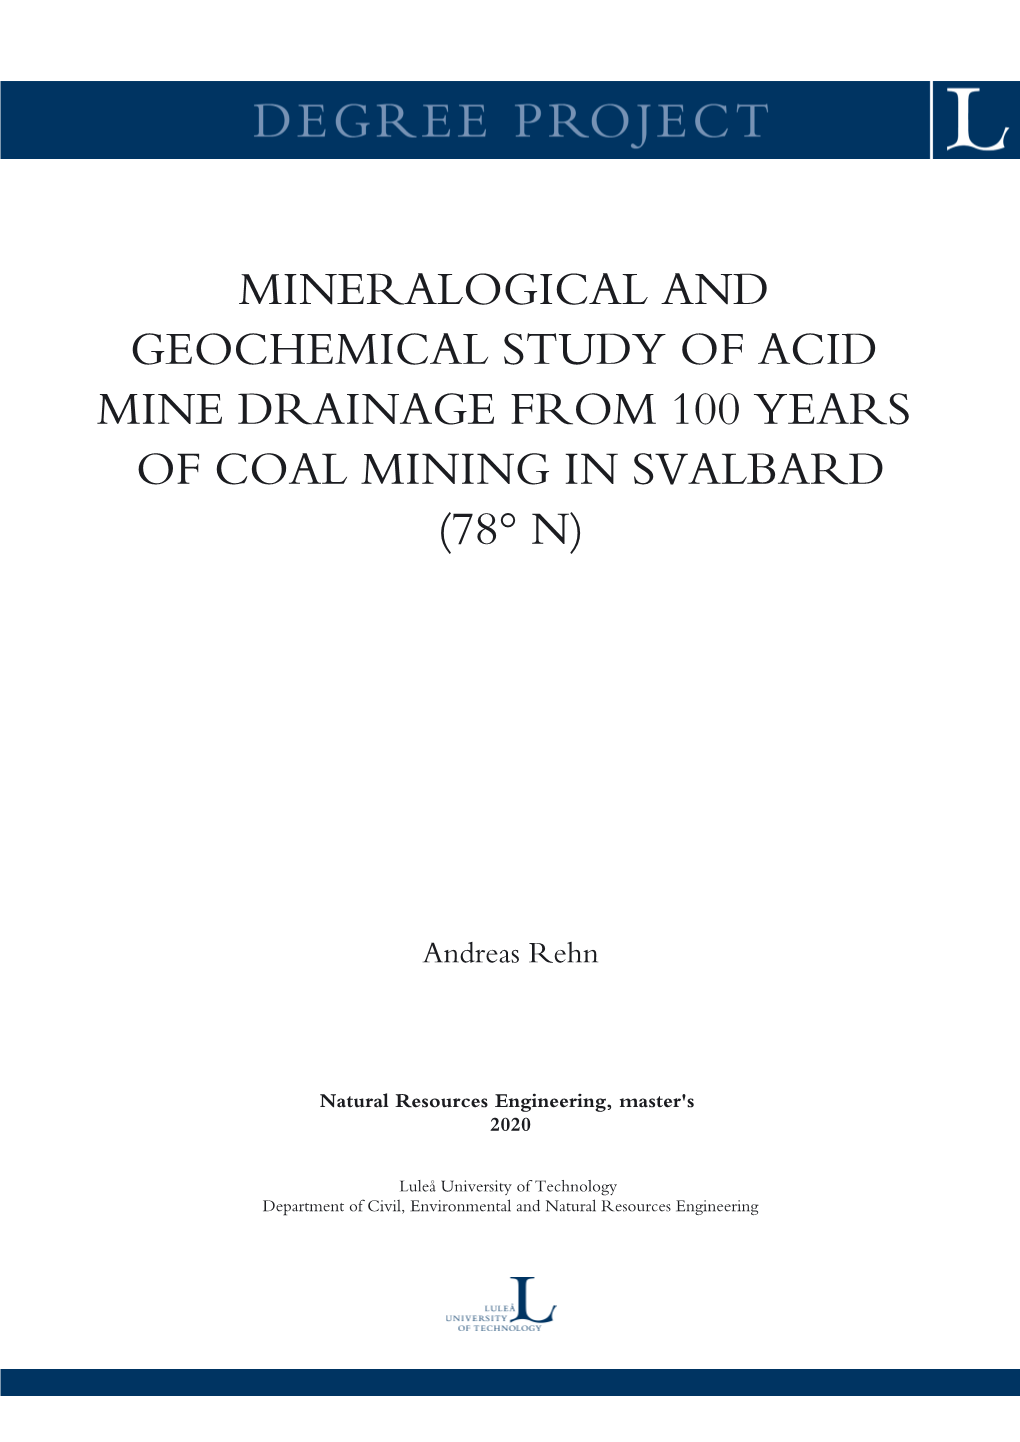 Mineralogical and Geochemical Study of Acid Mine Drainage from 100 Years of Coal Mining in Svalbard (78° N)